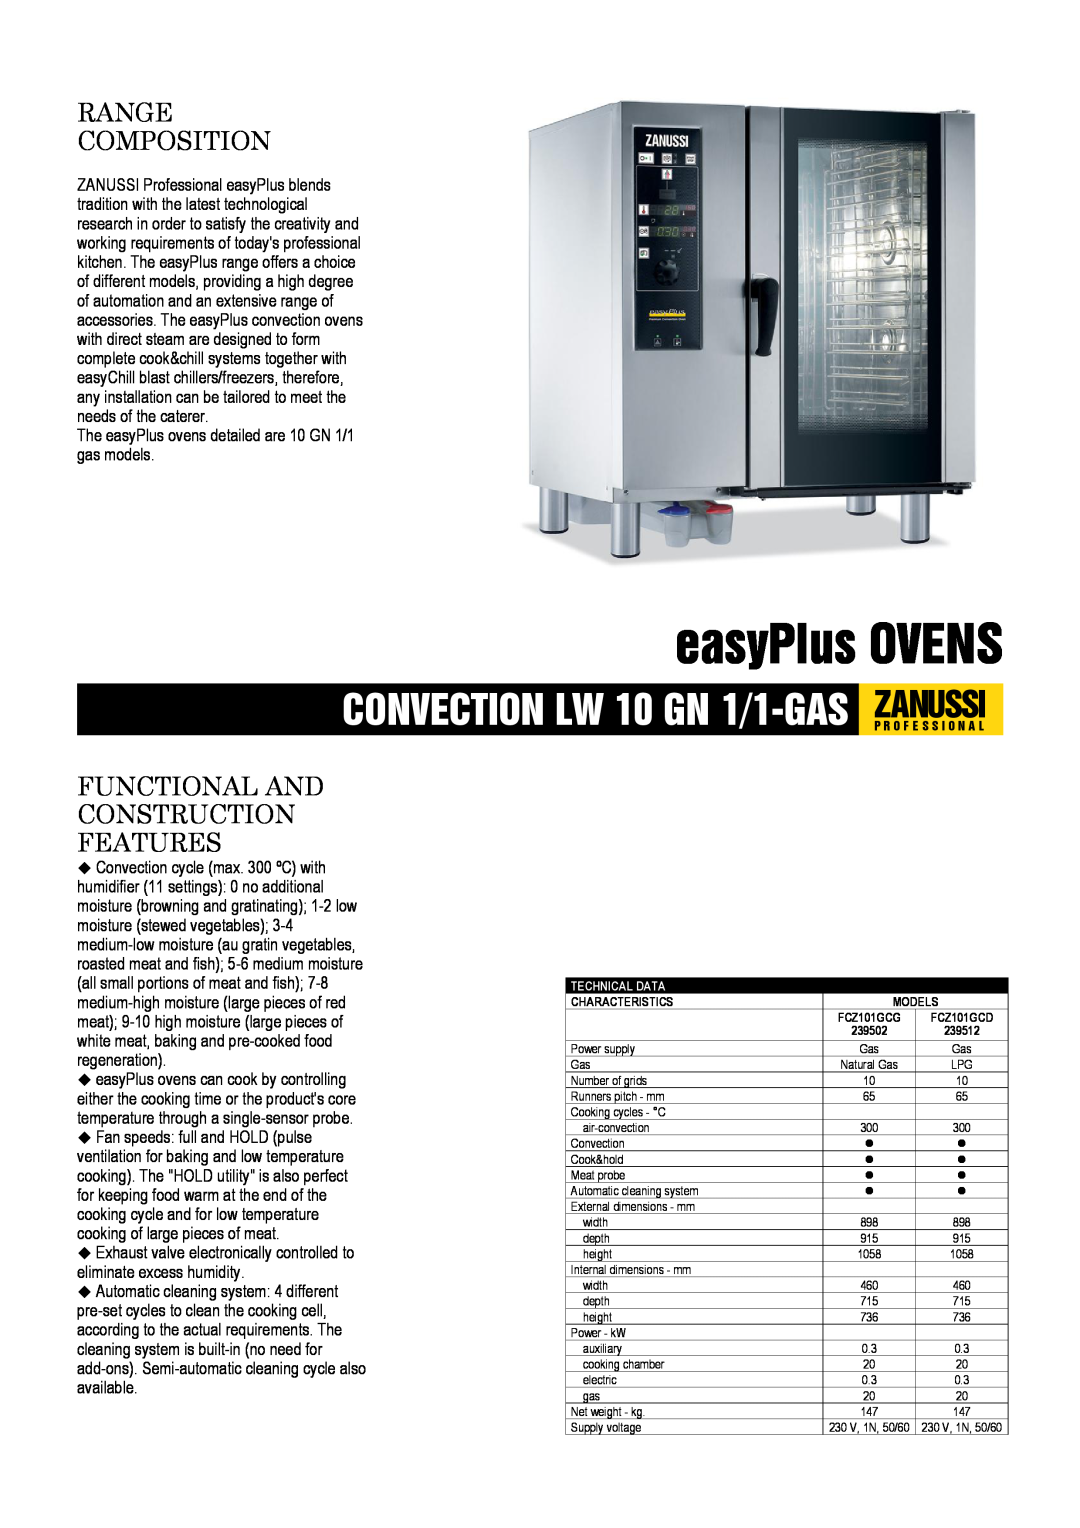 Zanussi FCZ101GCG, FCZ101GCD, 239512 dimensions easyPlus OVENS, Range Composition, Functional And Construction Features 